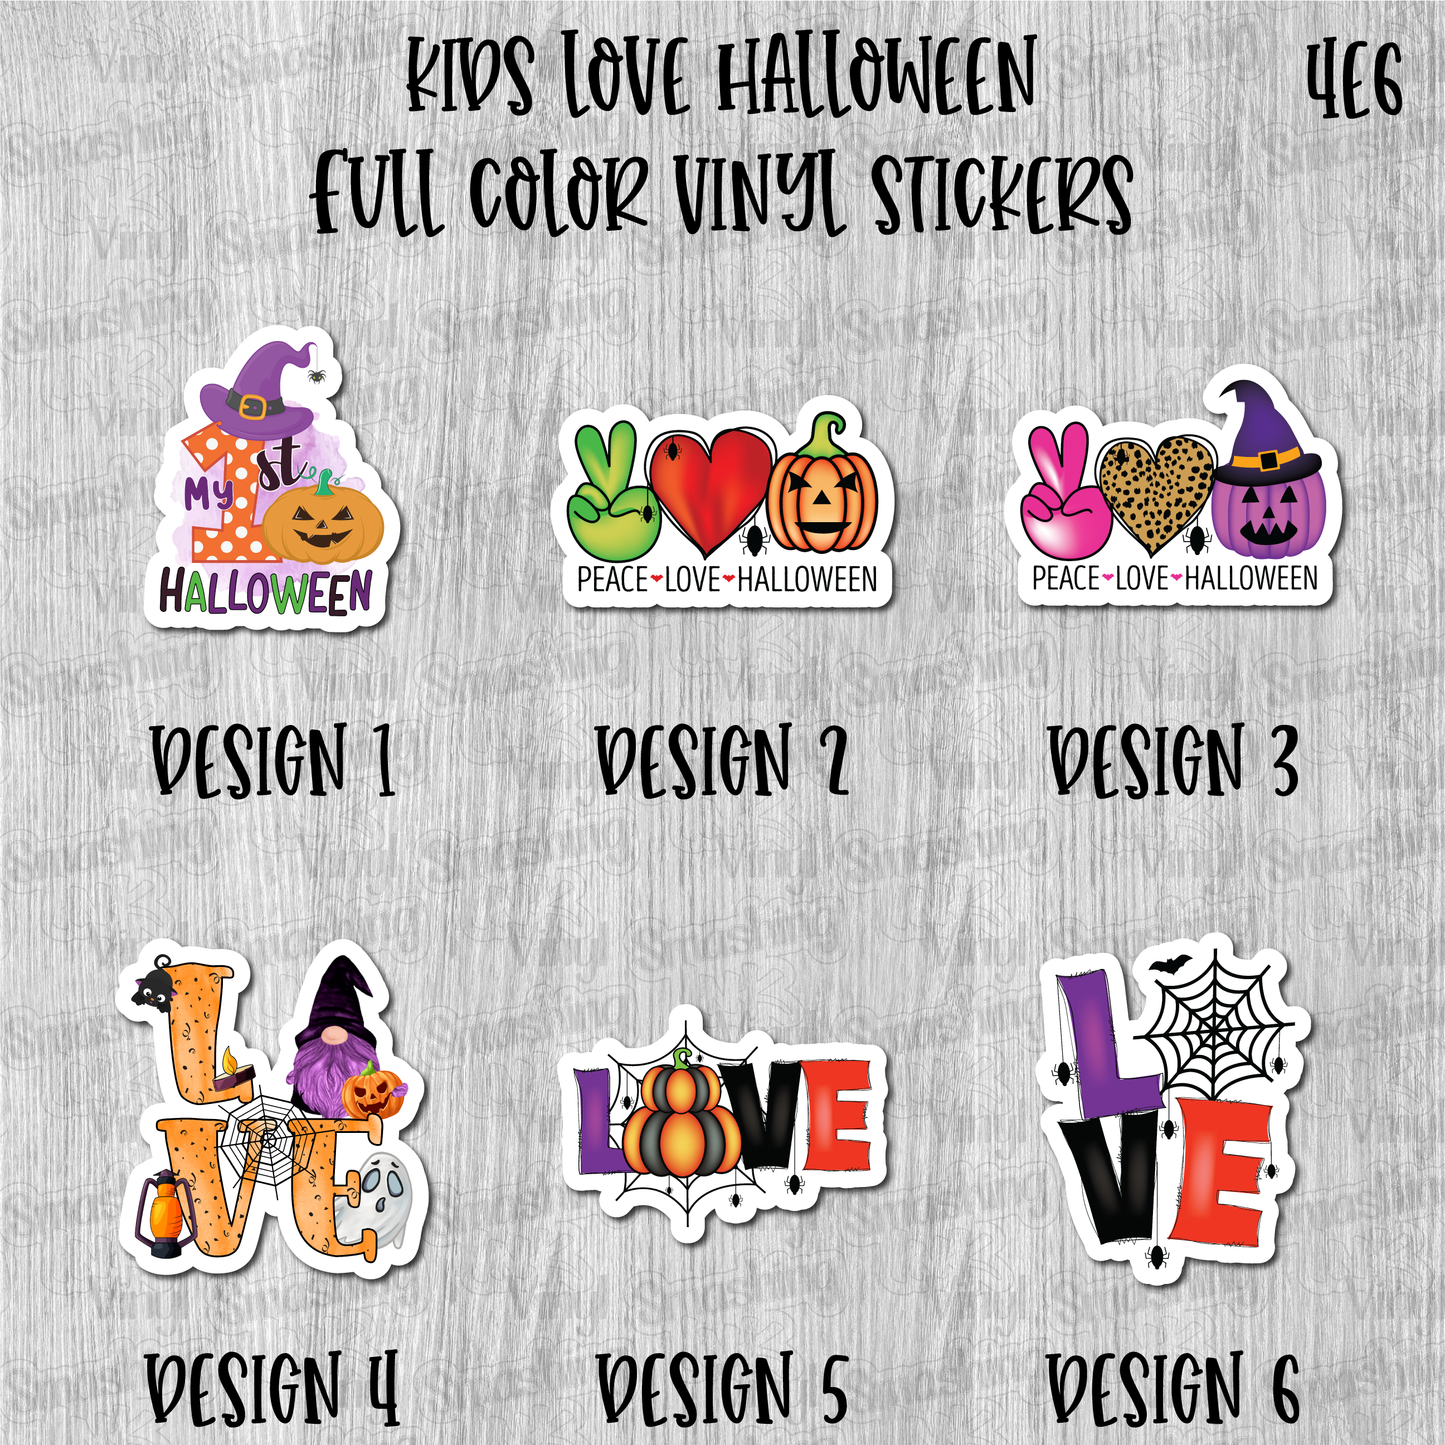 Kids Love Halloween - Full Color Vinyl Stickers (SHIPS IN 3-7 BUS DAYS)